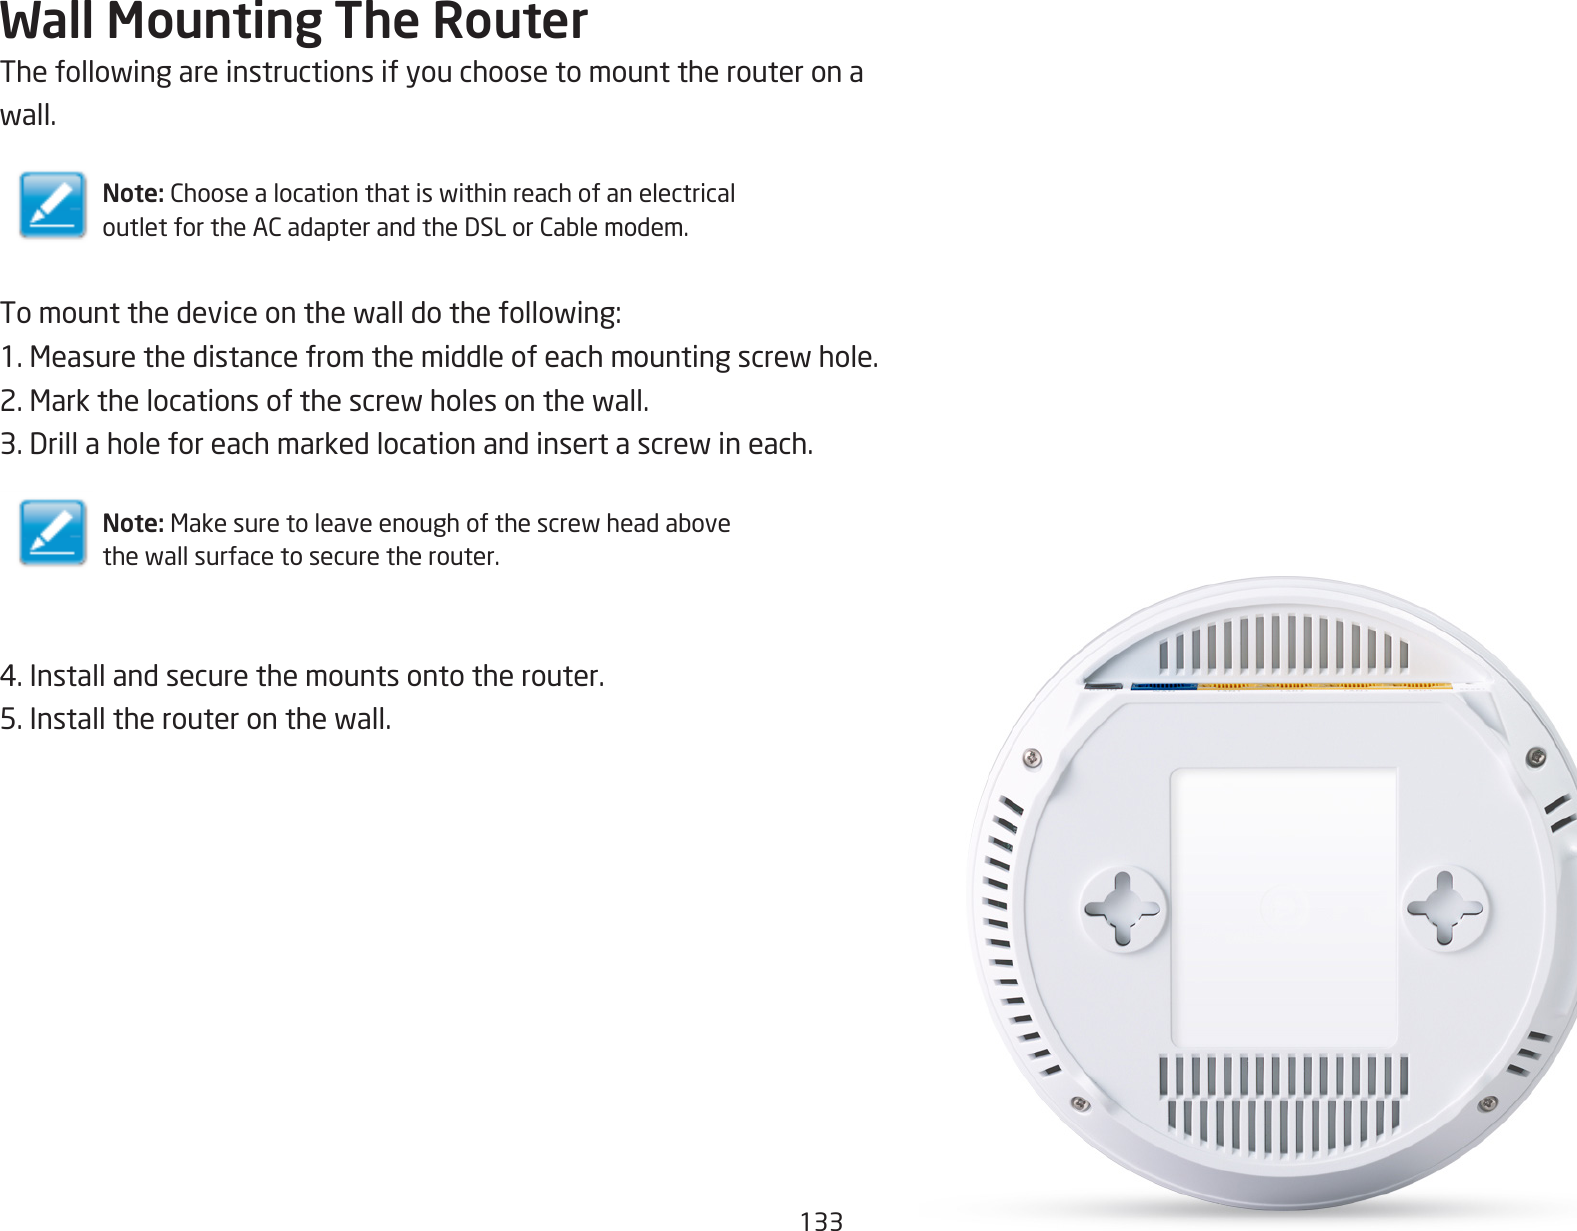 133Wall Mounting The RouterThefollowingareinstructionsifyouchoosetomounttherouteronawall.Note: ChoosealocationthatiswithinreachofanelectricaloutletfortheACadapterandtheDSLorCablemodem.Tomountthedeviceonthewalldothefollowing:1.Measurethedistancefromthemiddleofeachmountingscrewhole.2.Markthelocationsofthescrewholesonthewall.3.Drillaholeforeachmarkedlocationandinsertascrewineach.Note: Makesuretoleaveenoughofthescrewheadabovethewallsurfacetosecuretherouter.4.Installandsecurethemountsontotherouter.5.Installtherouteronthewall.